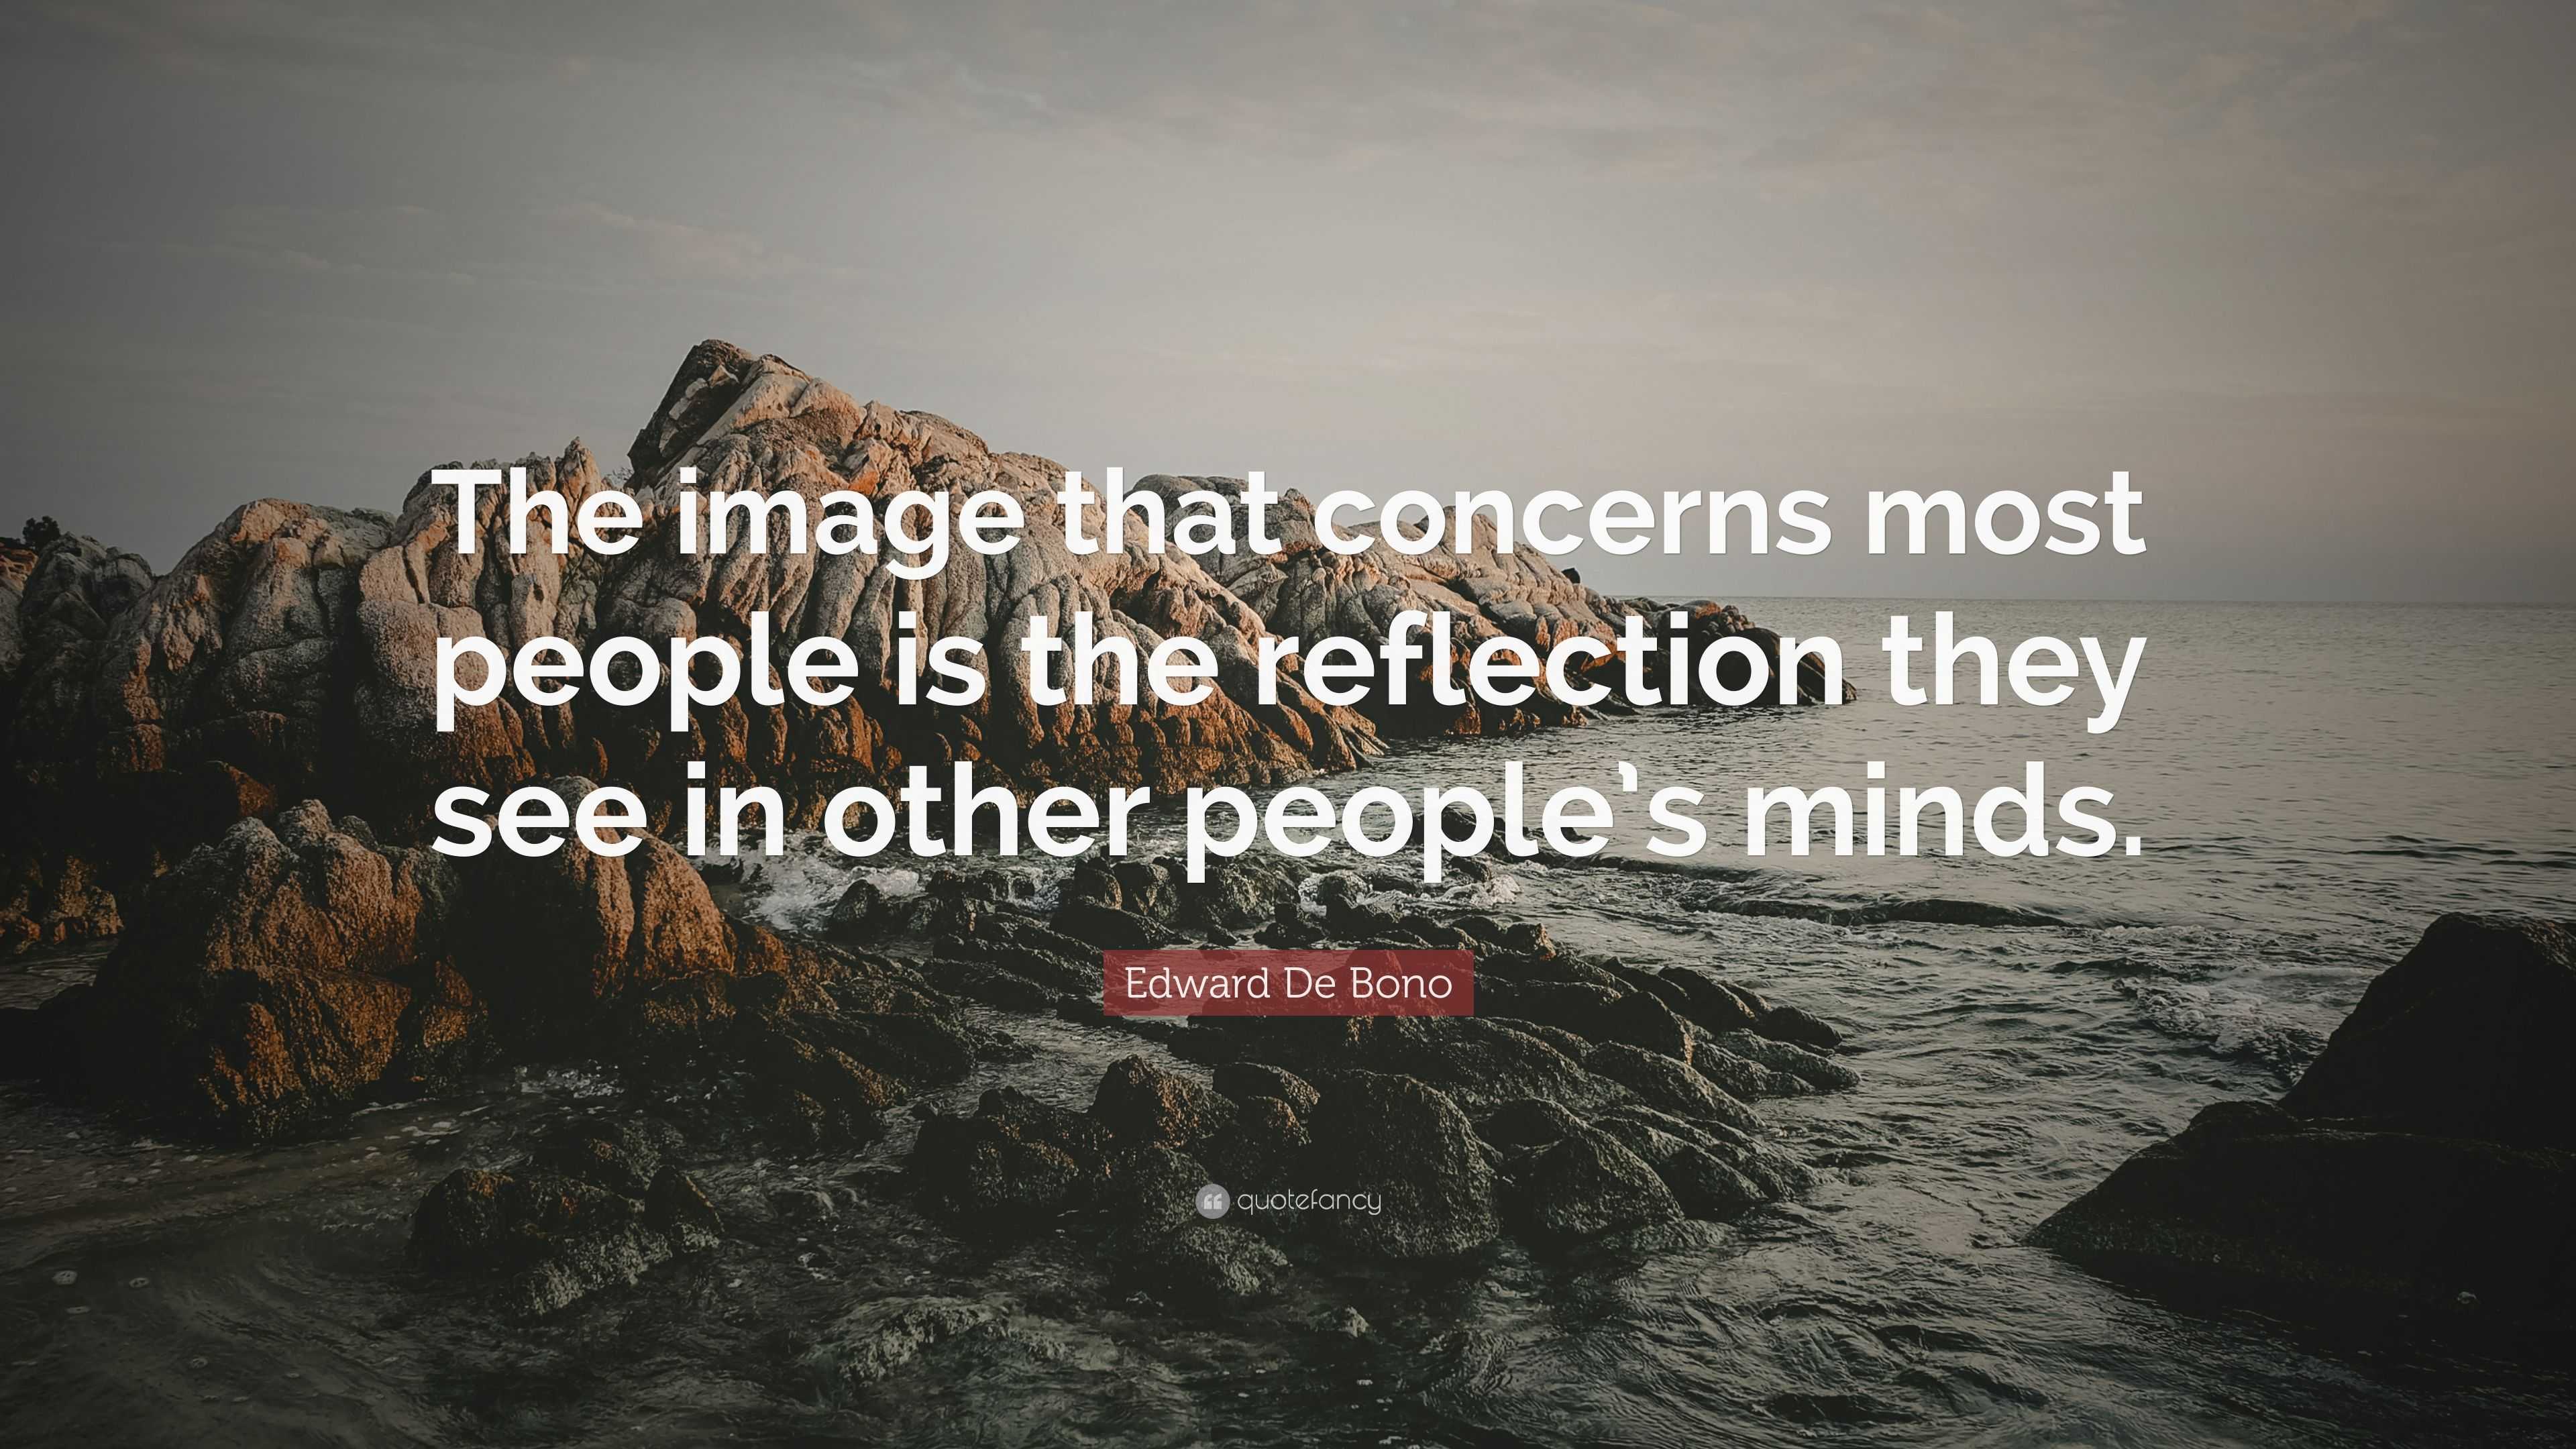 Edward De Bono Quote: “The image that concerns most people is the ...